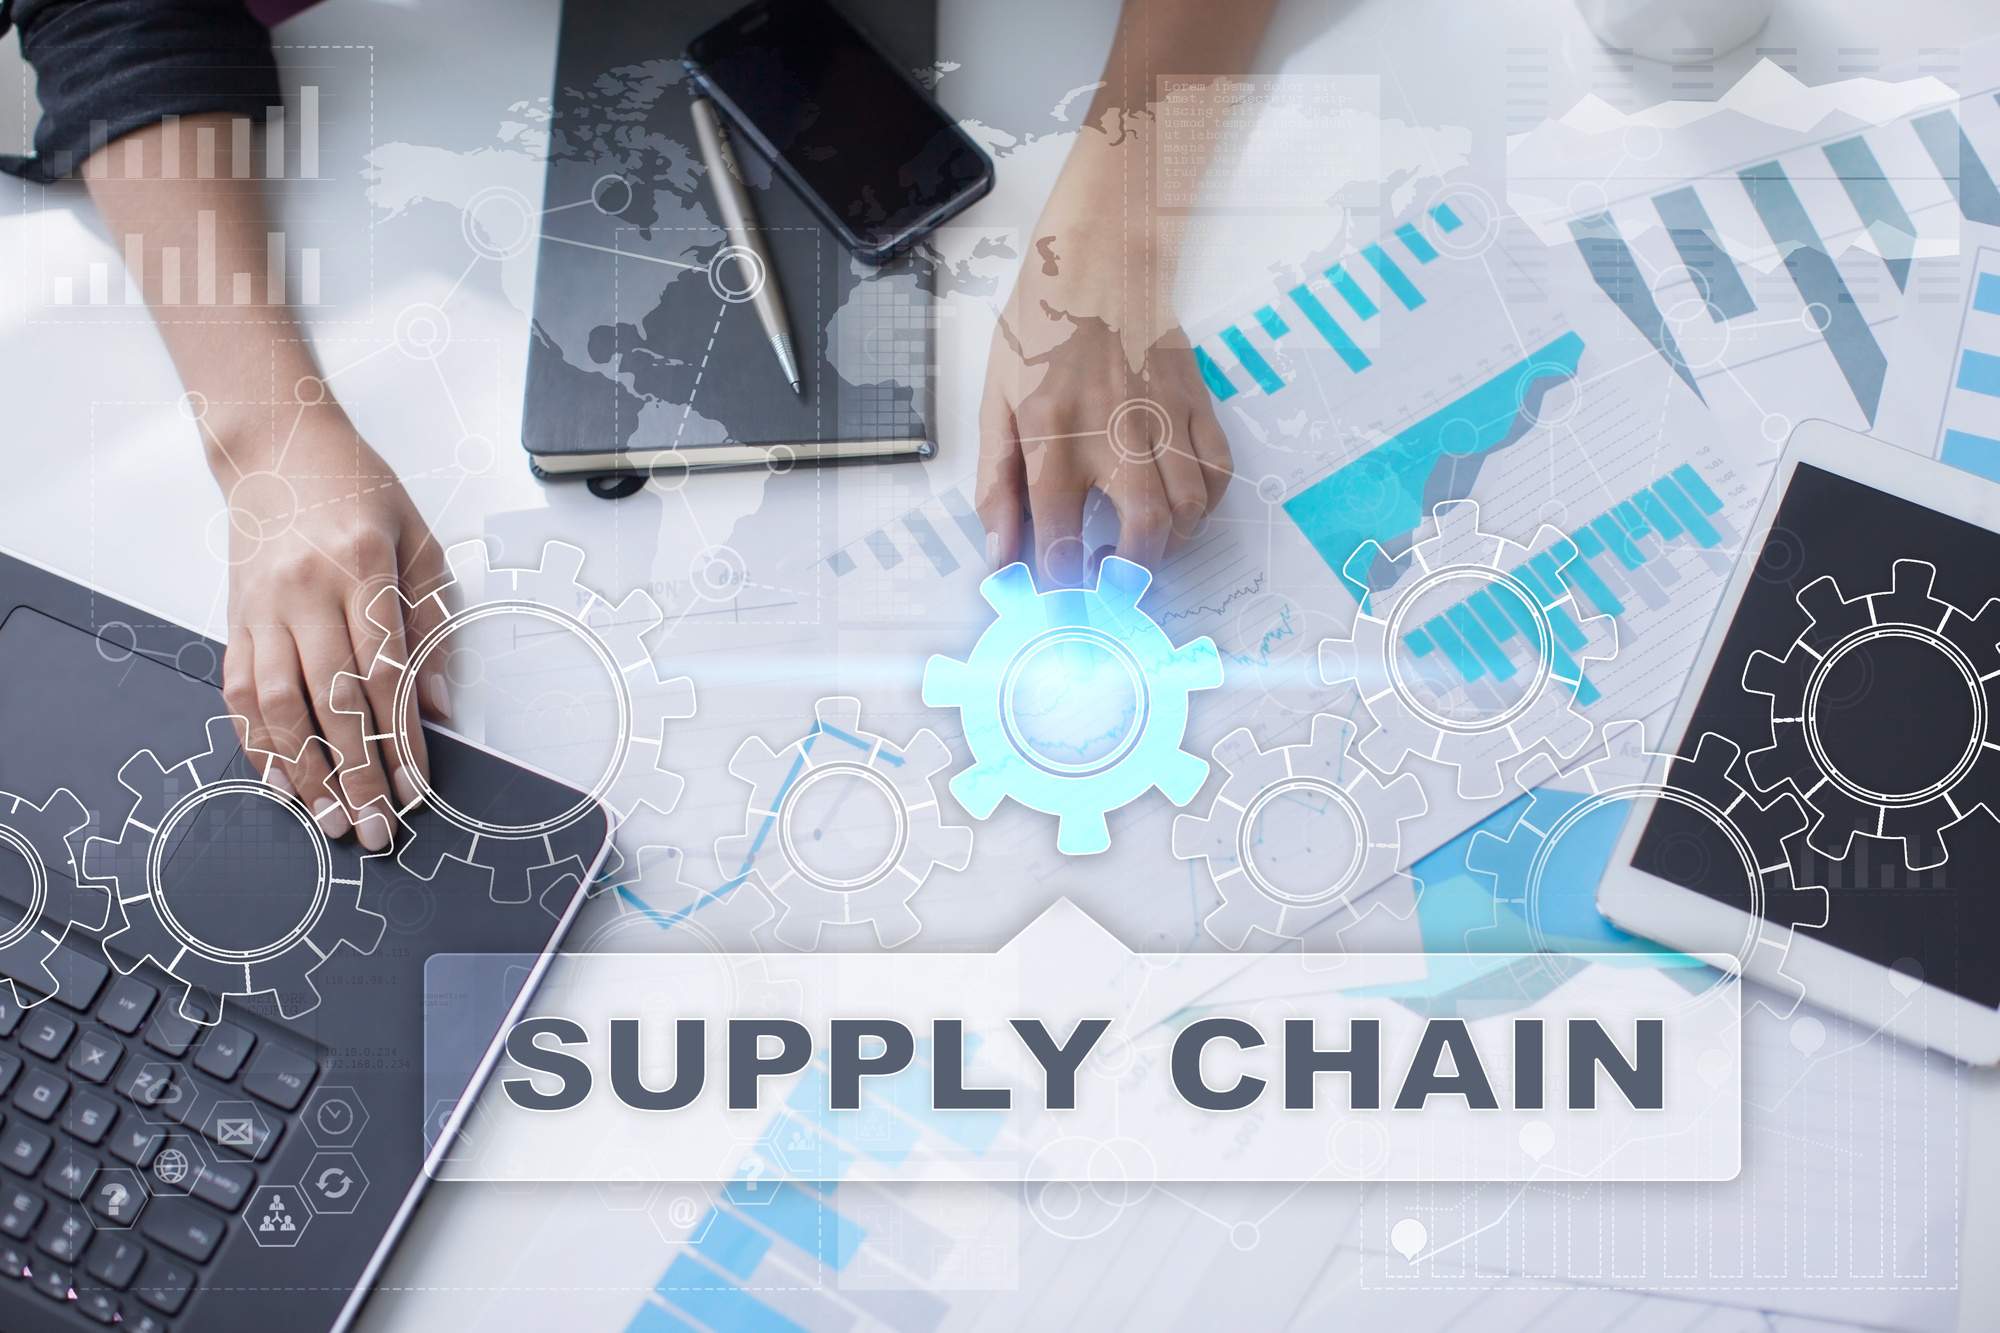 How to Make a Supply Chain More Efficient